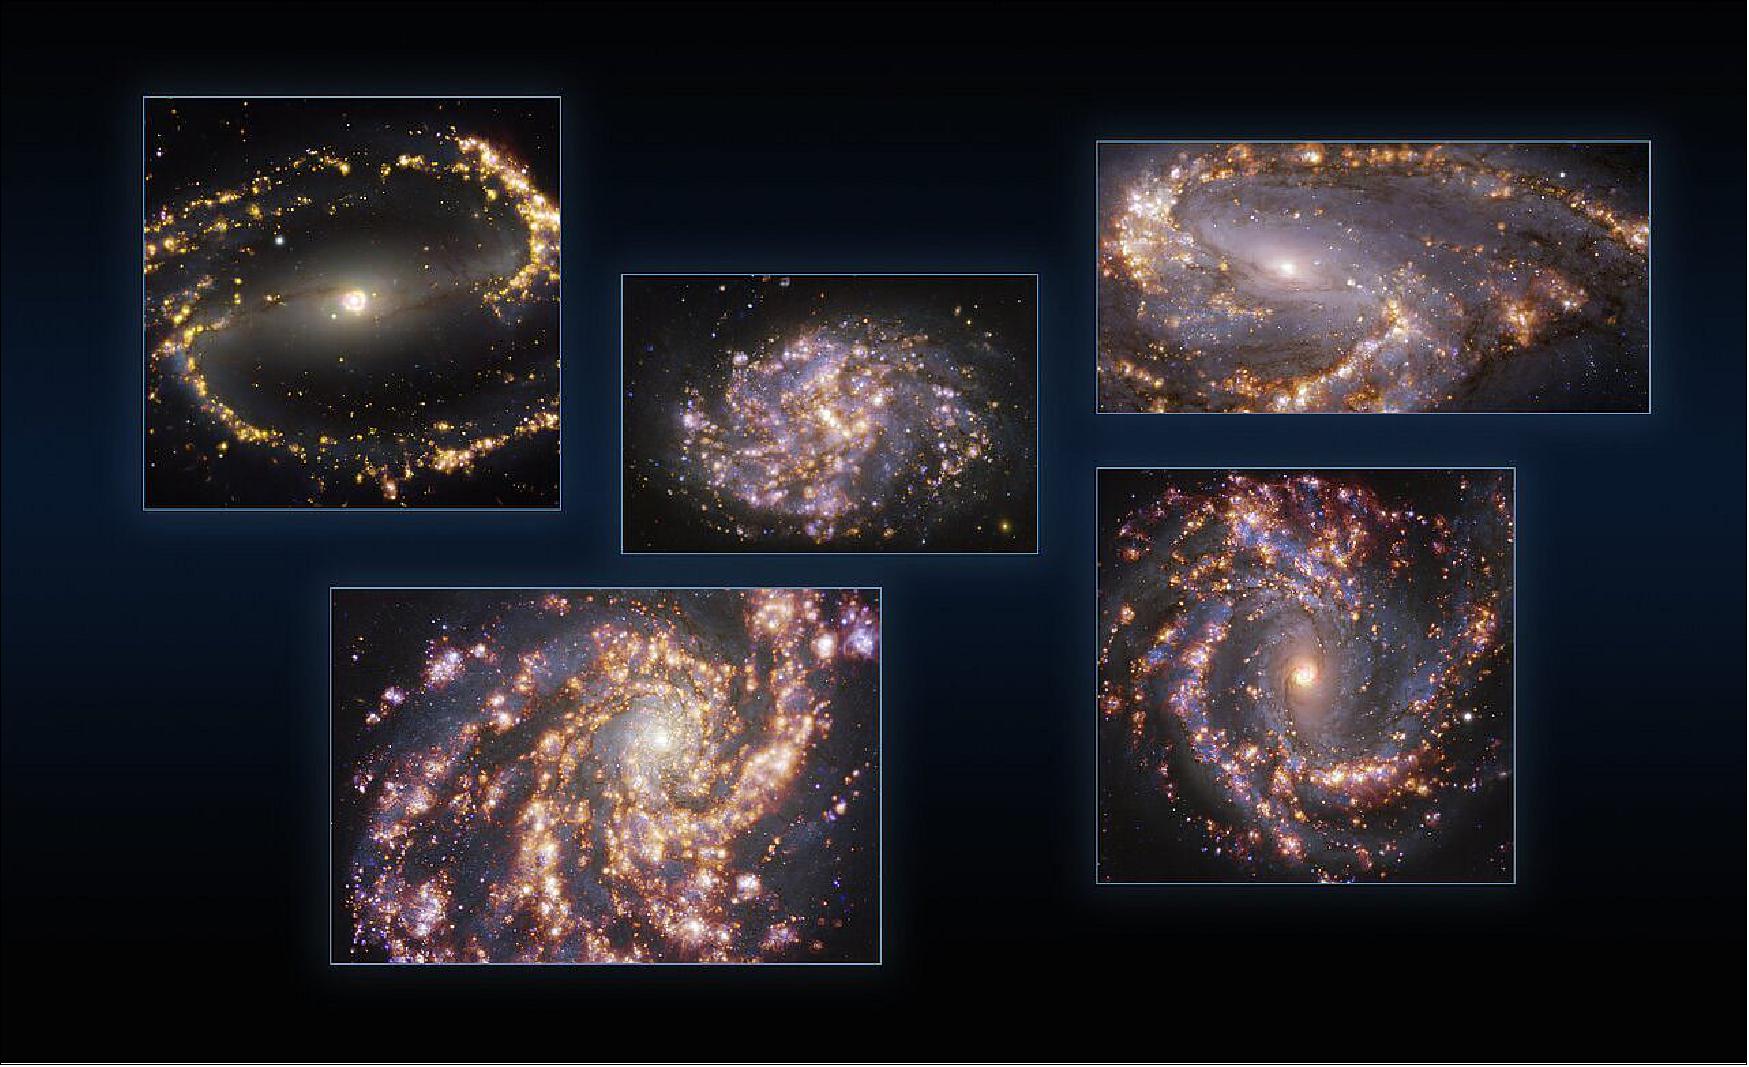 Figure 18: This image combines observations of the nearby galaxies NGC 1300, NGC 1087, NGC 3627 (top, from left to right), NGC 4254 and NGC 4303 (bottom, from left to right) taken with the Multi-Unit Spectroscopic Explorer (MUSE) on ESO’s Very Large Telescope (VLT). Each individual image is a combination of observations conducted at different wavelengths of light to map stellar populations and warm gas. The golden glows mainly correspond to clouds of ionized hydrogen, oxygen and sulphur gas, marking the presence of newly born stars, while the bluish regions in the background reveal the distribution of slightly older stars. -The images were taken as part of the Physics at High Angular resolution in Nearby GalaxieS (PHANGS) project, which is making high-resolution observations of nearby galaxies with telescopes operating across the electromagnetic spectrum (image credit: ESO/PHANGS)